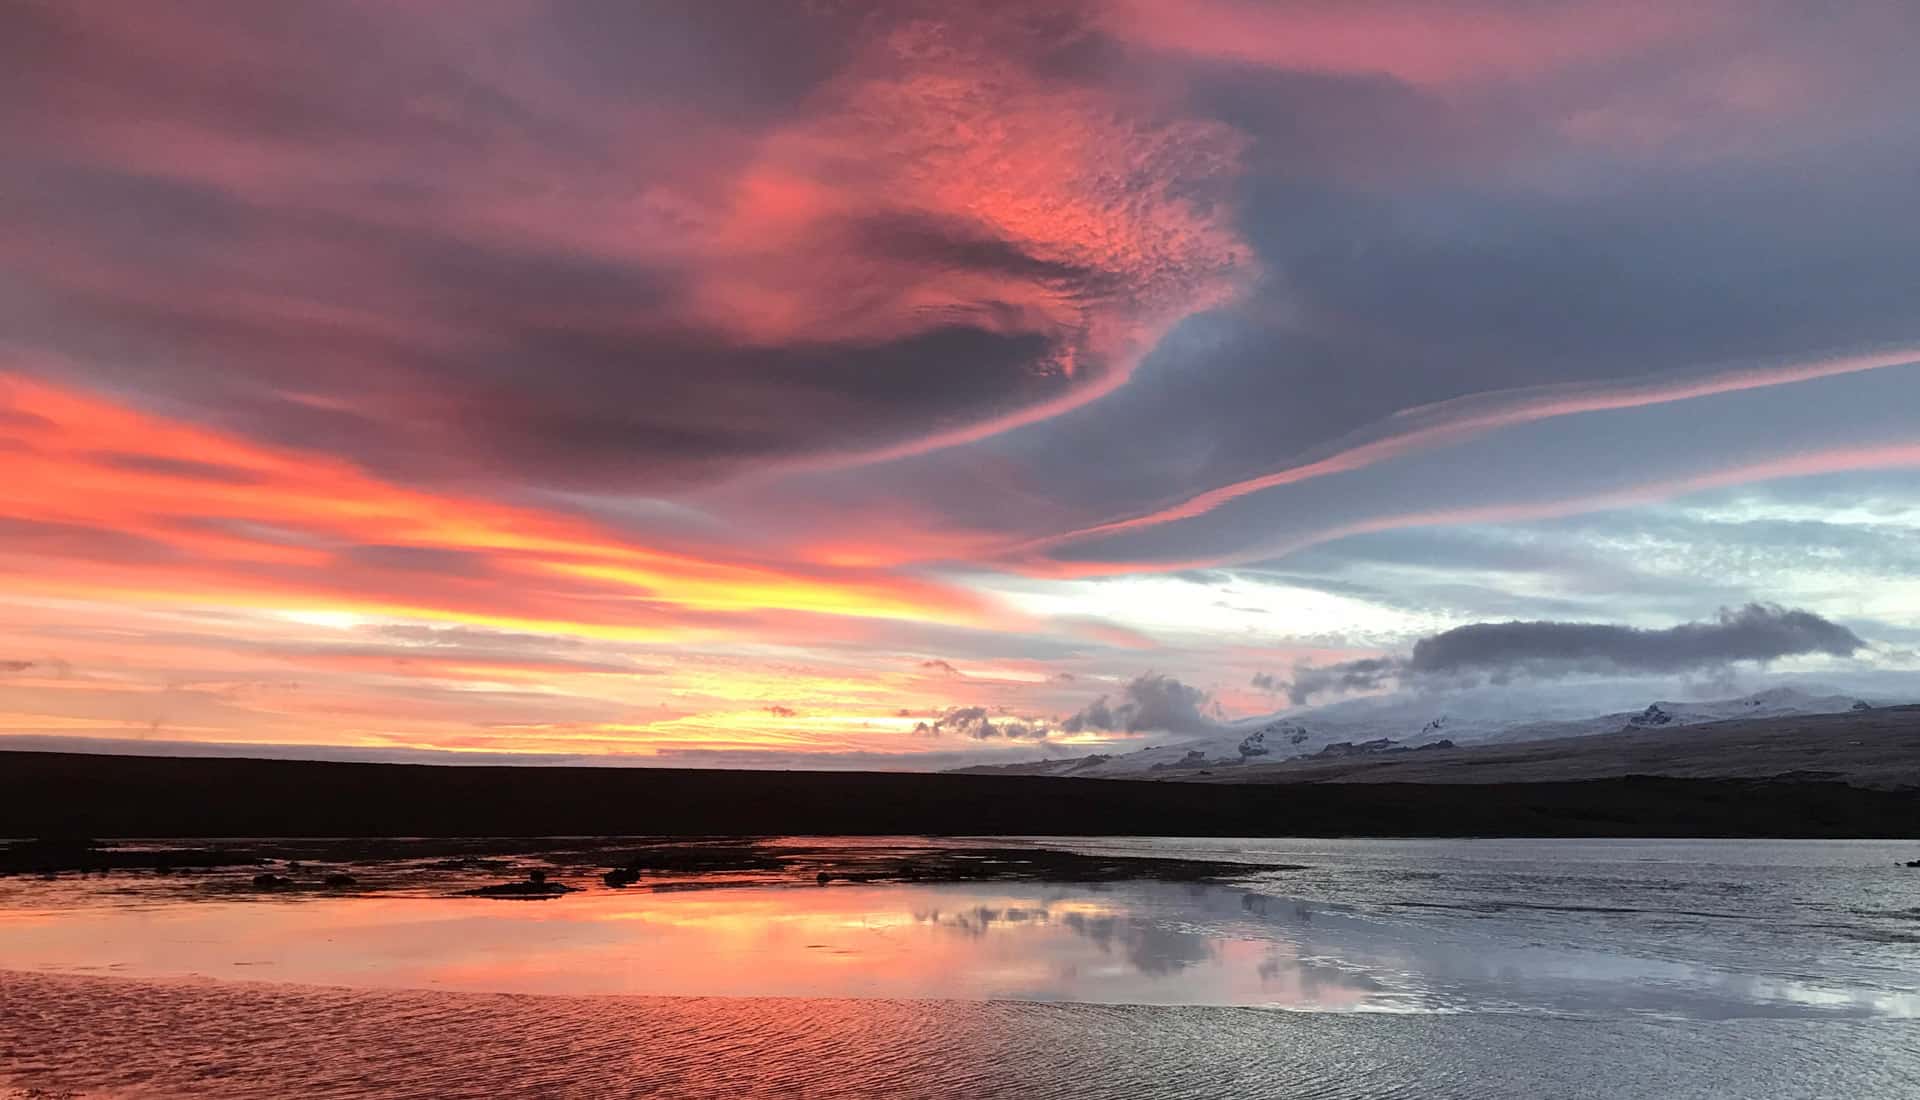 Skies of fire and ice during winter in Iceland